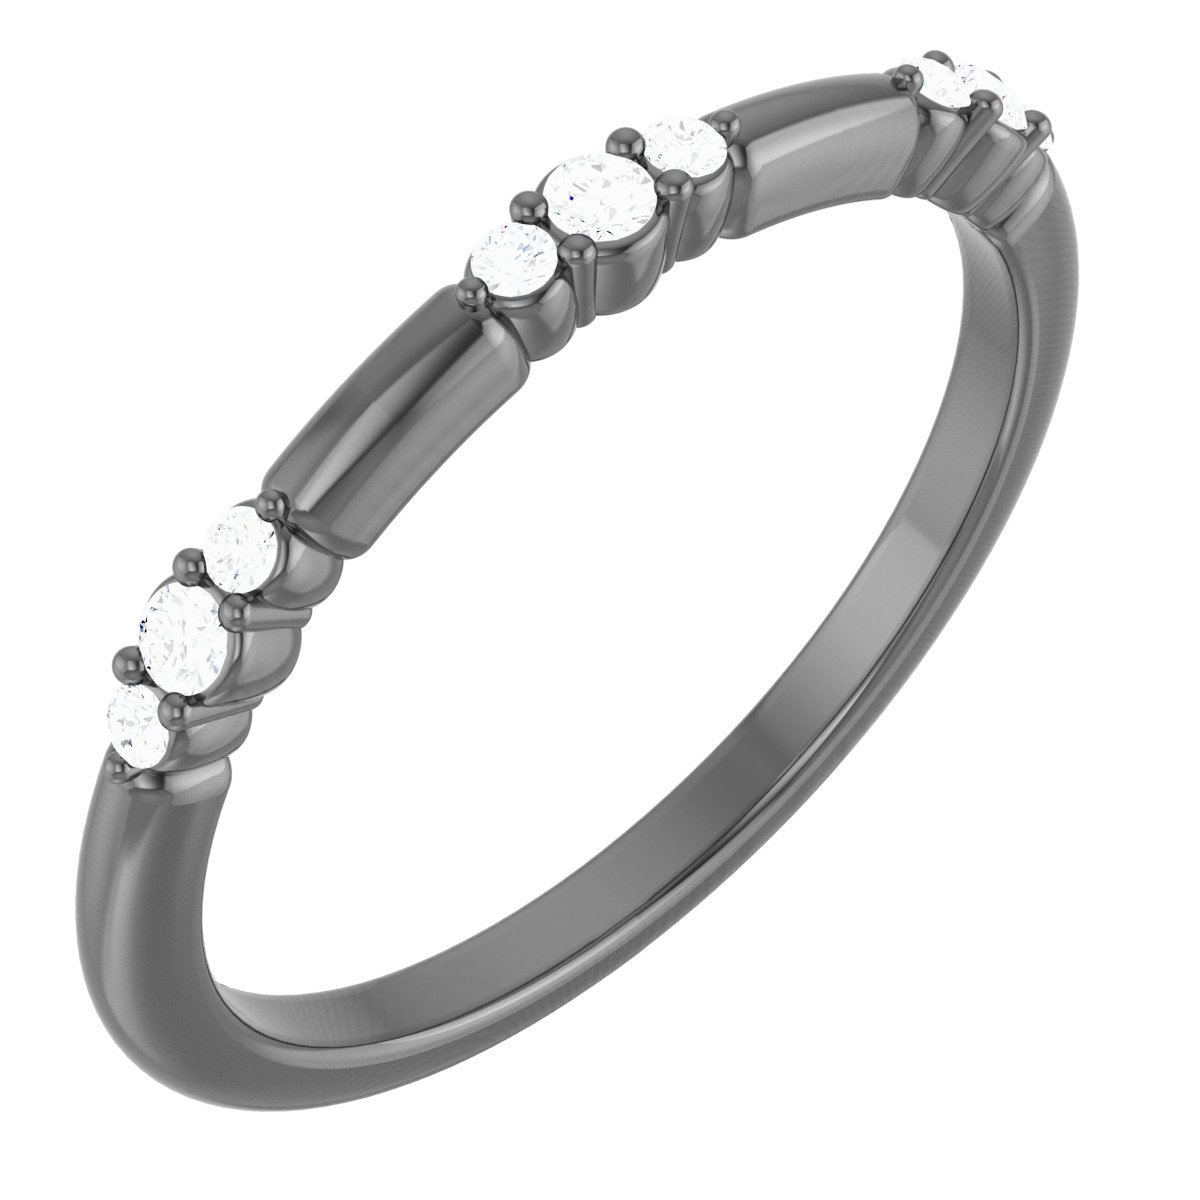 124033 / Unset / Continuum Sterling Silver / Polished / Stackable Ring Mounting